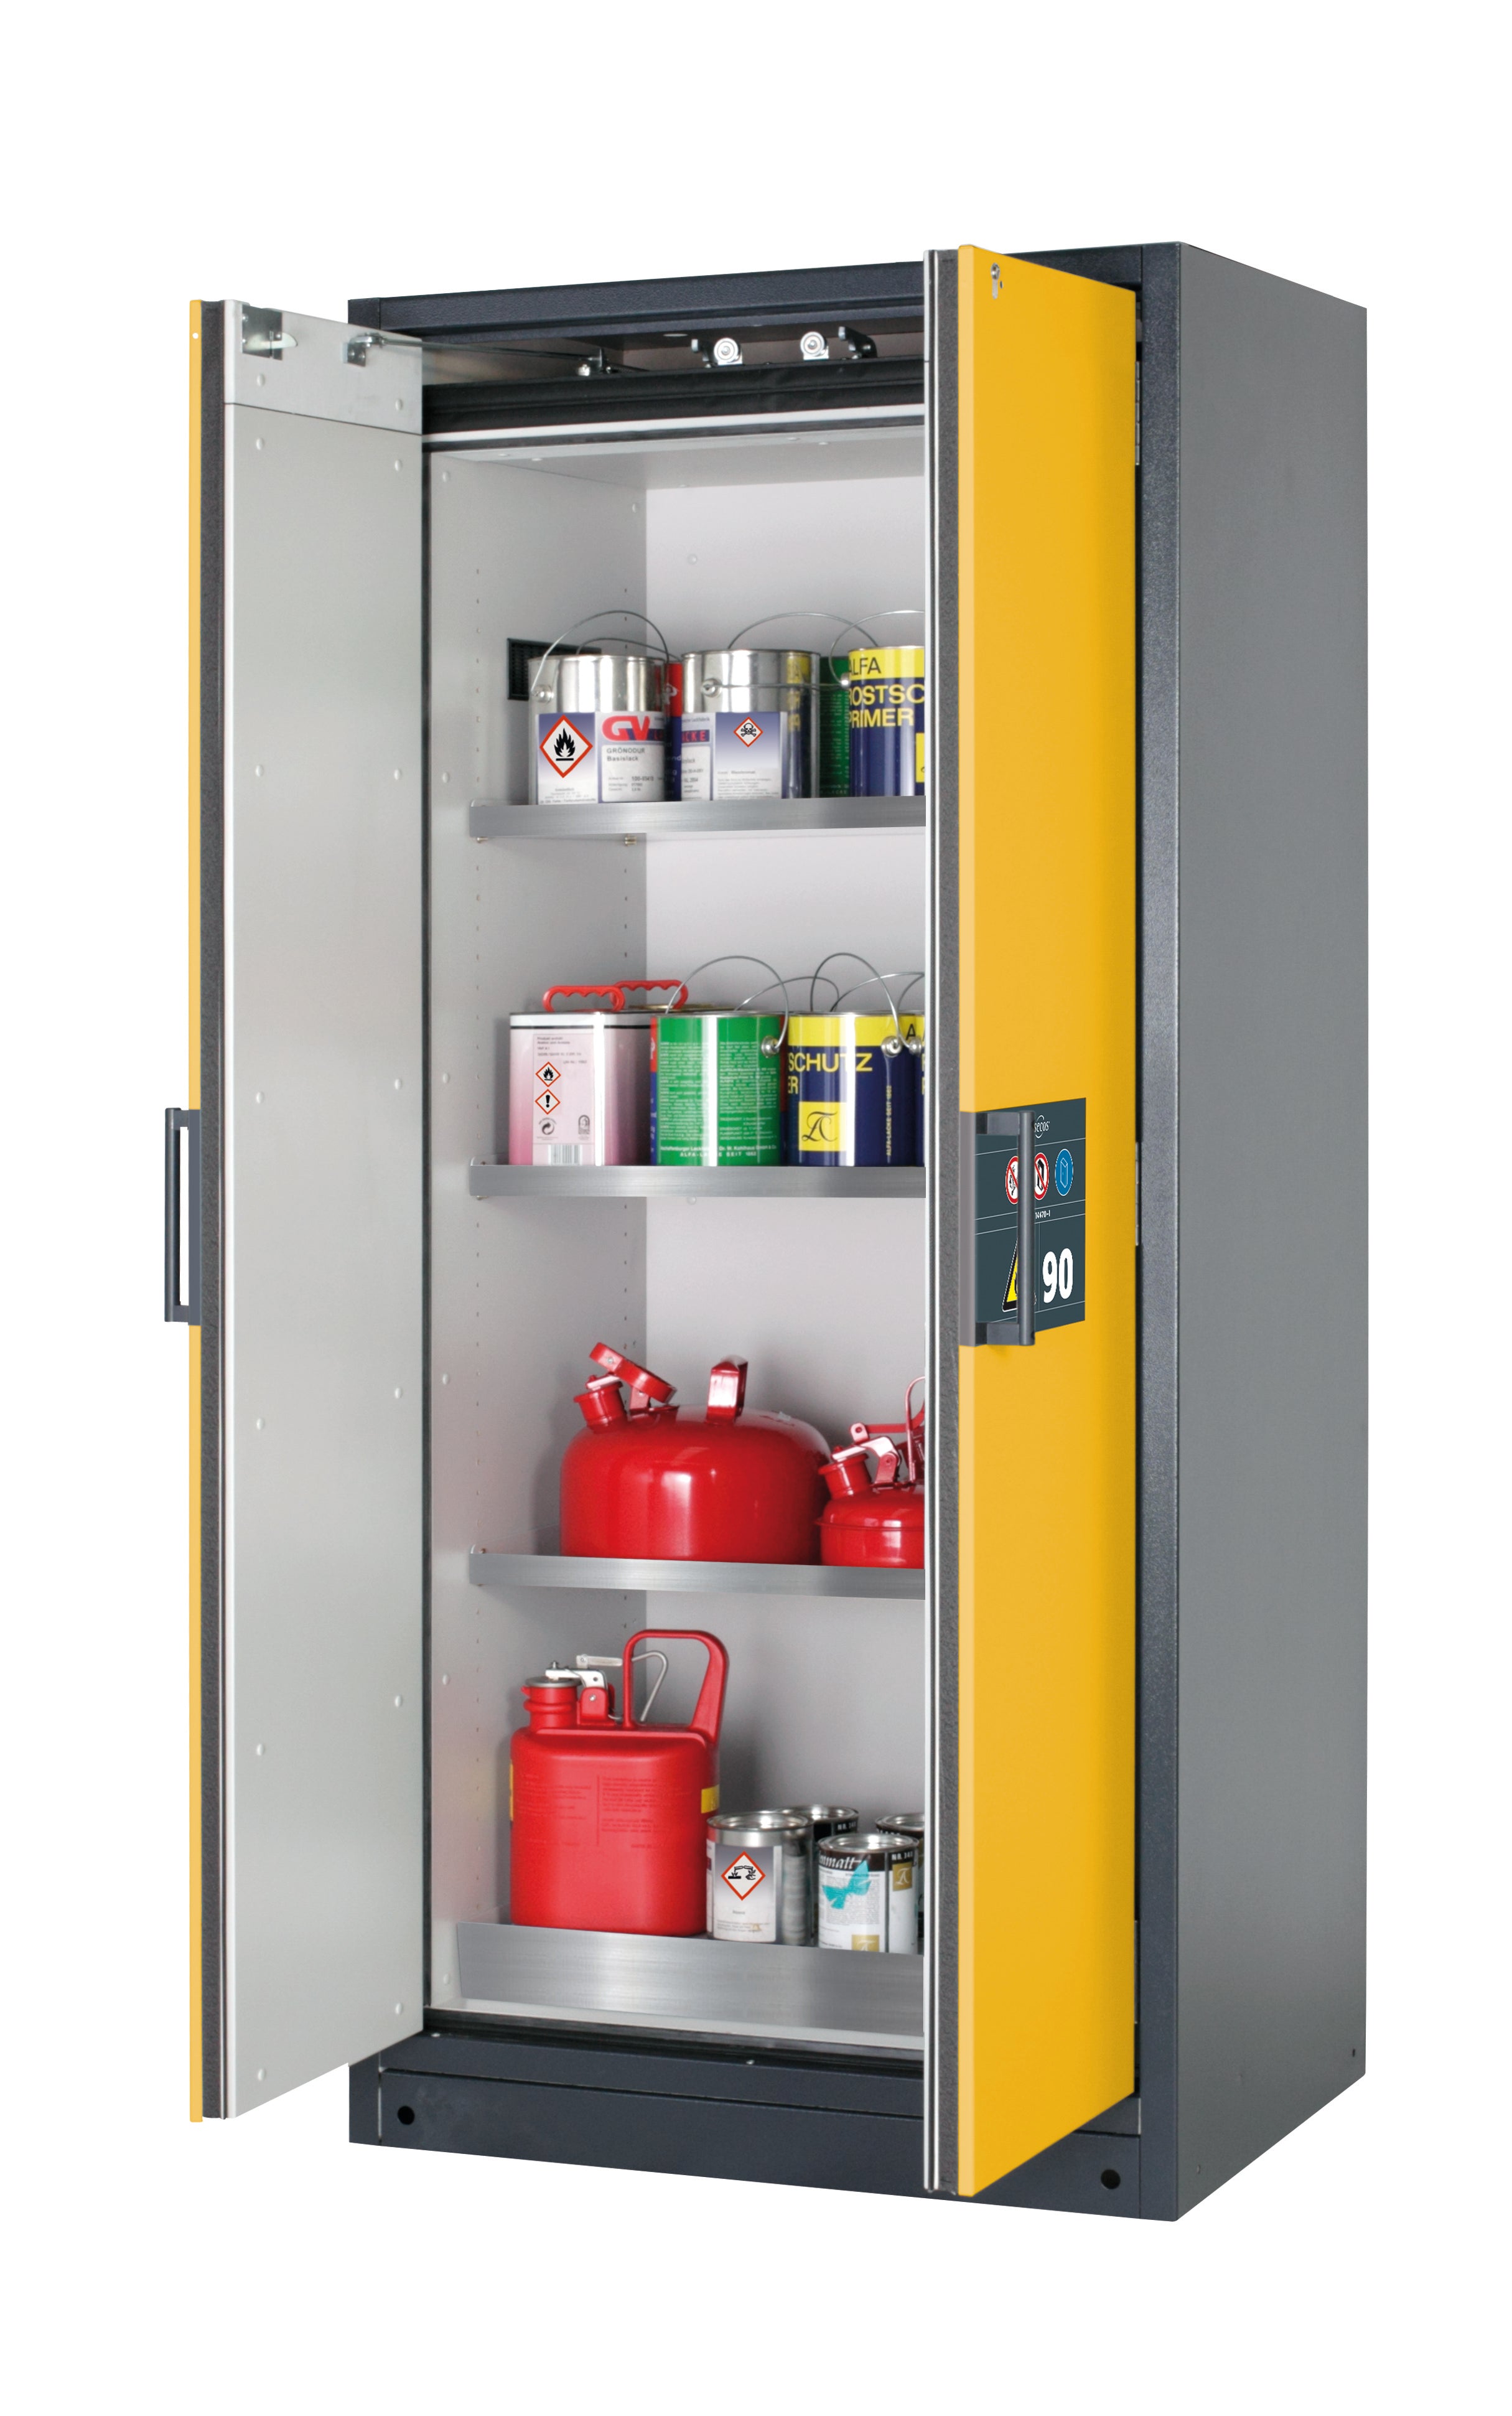 Type 90 safety storage cabinet Q-CLASSIC-90 model Q90.195.090 in warning yellow RAL 1004 with 3x shelf standard (stainless steel 1.4301),